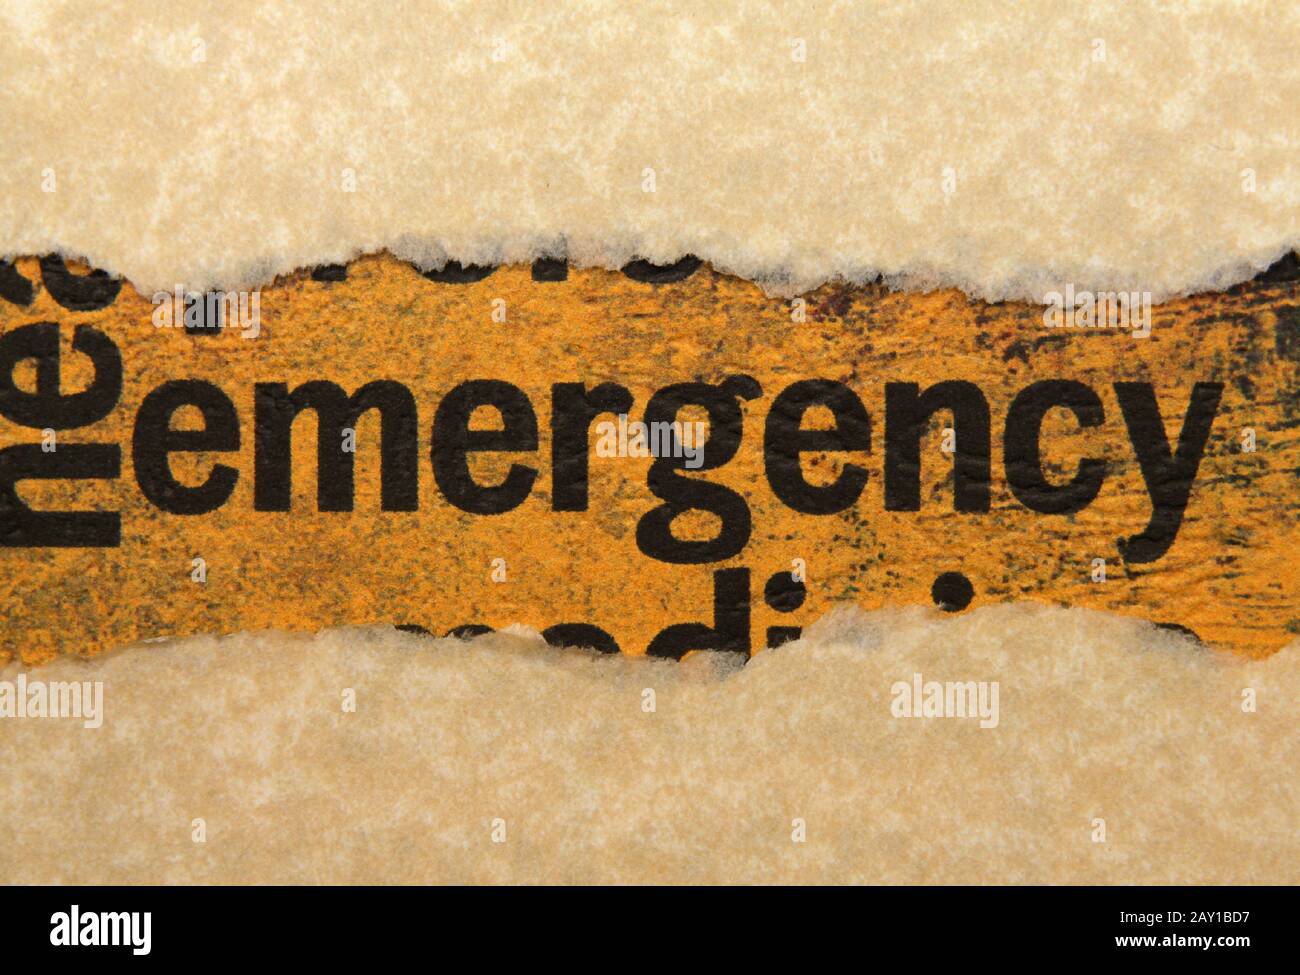 Emergency torn paper Stock Photo